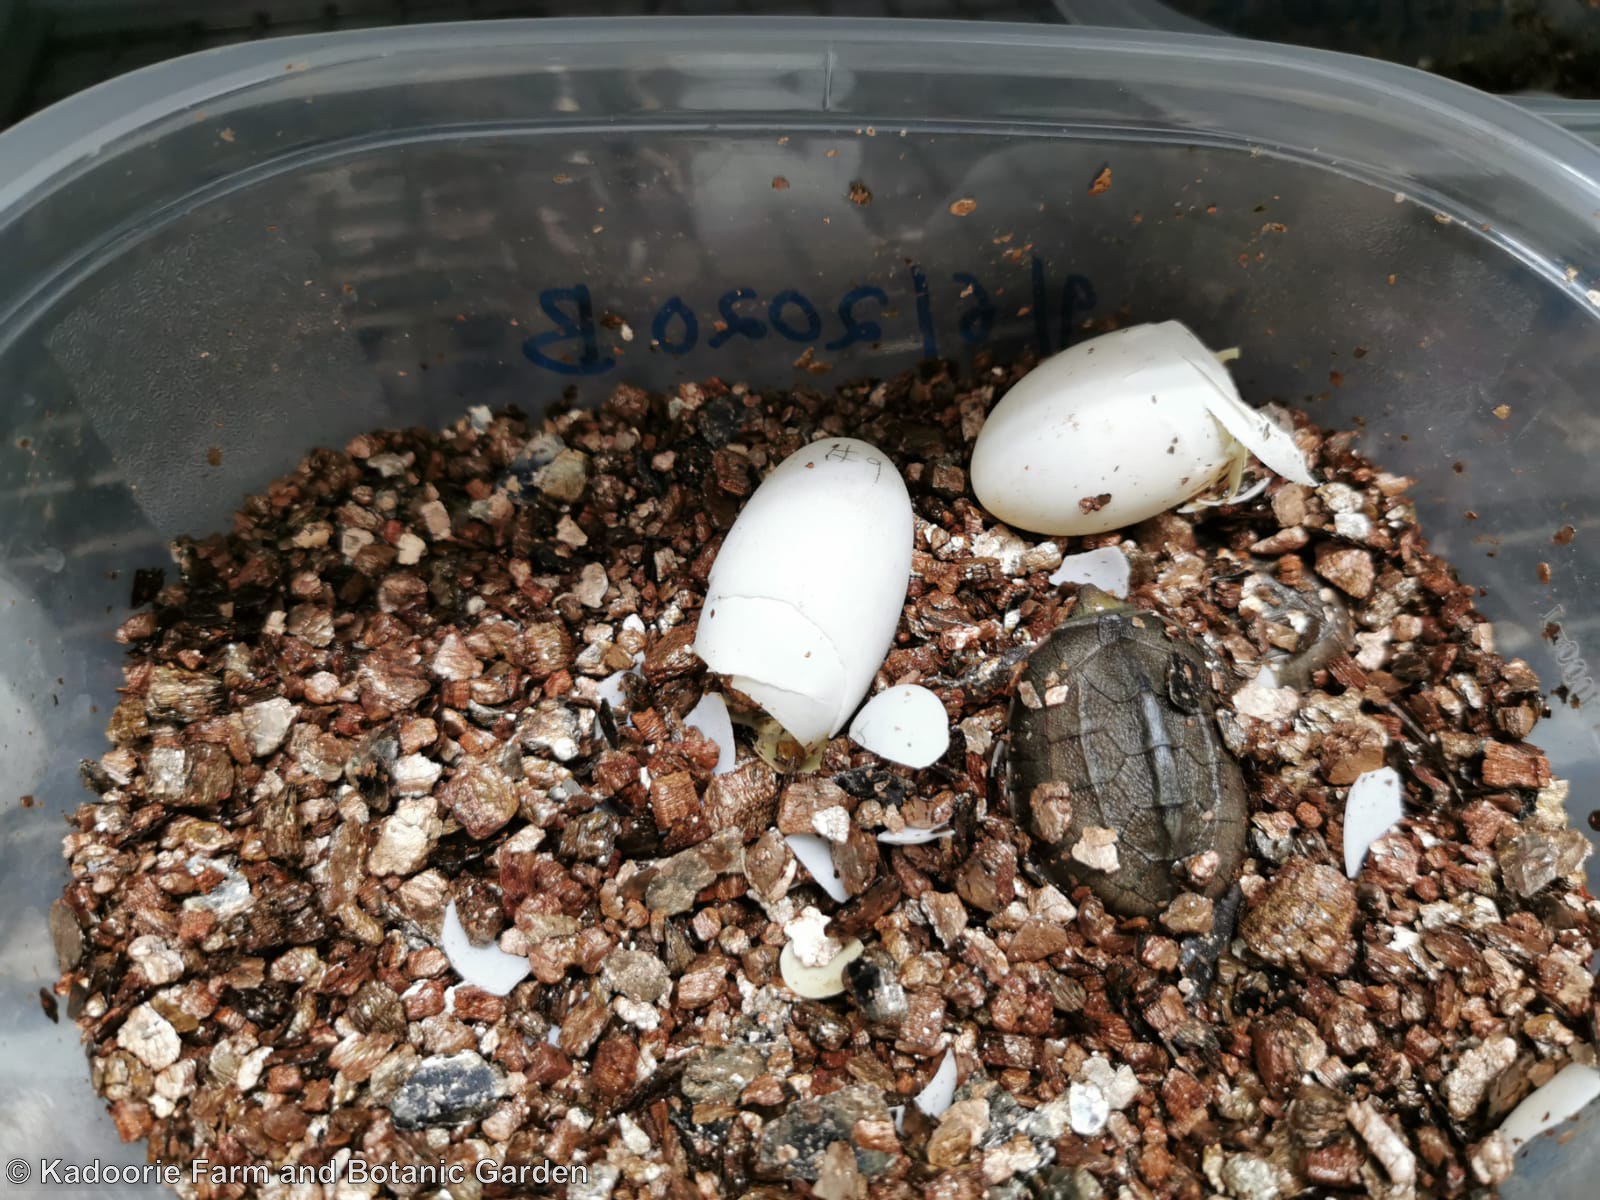 Time to celebrate the first two Golden Coin Turtle hatchlings of 2020